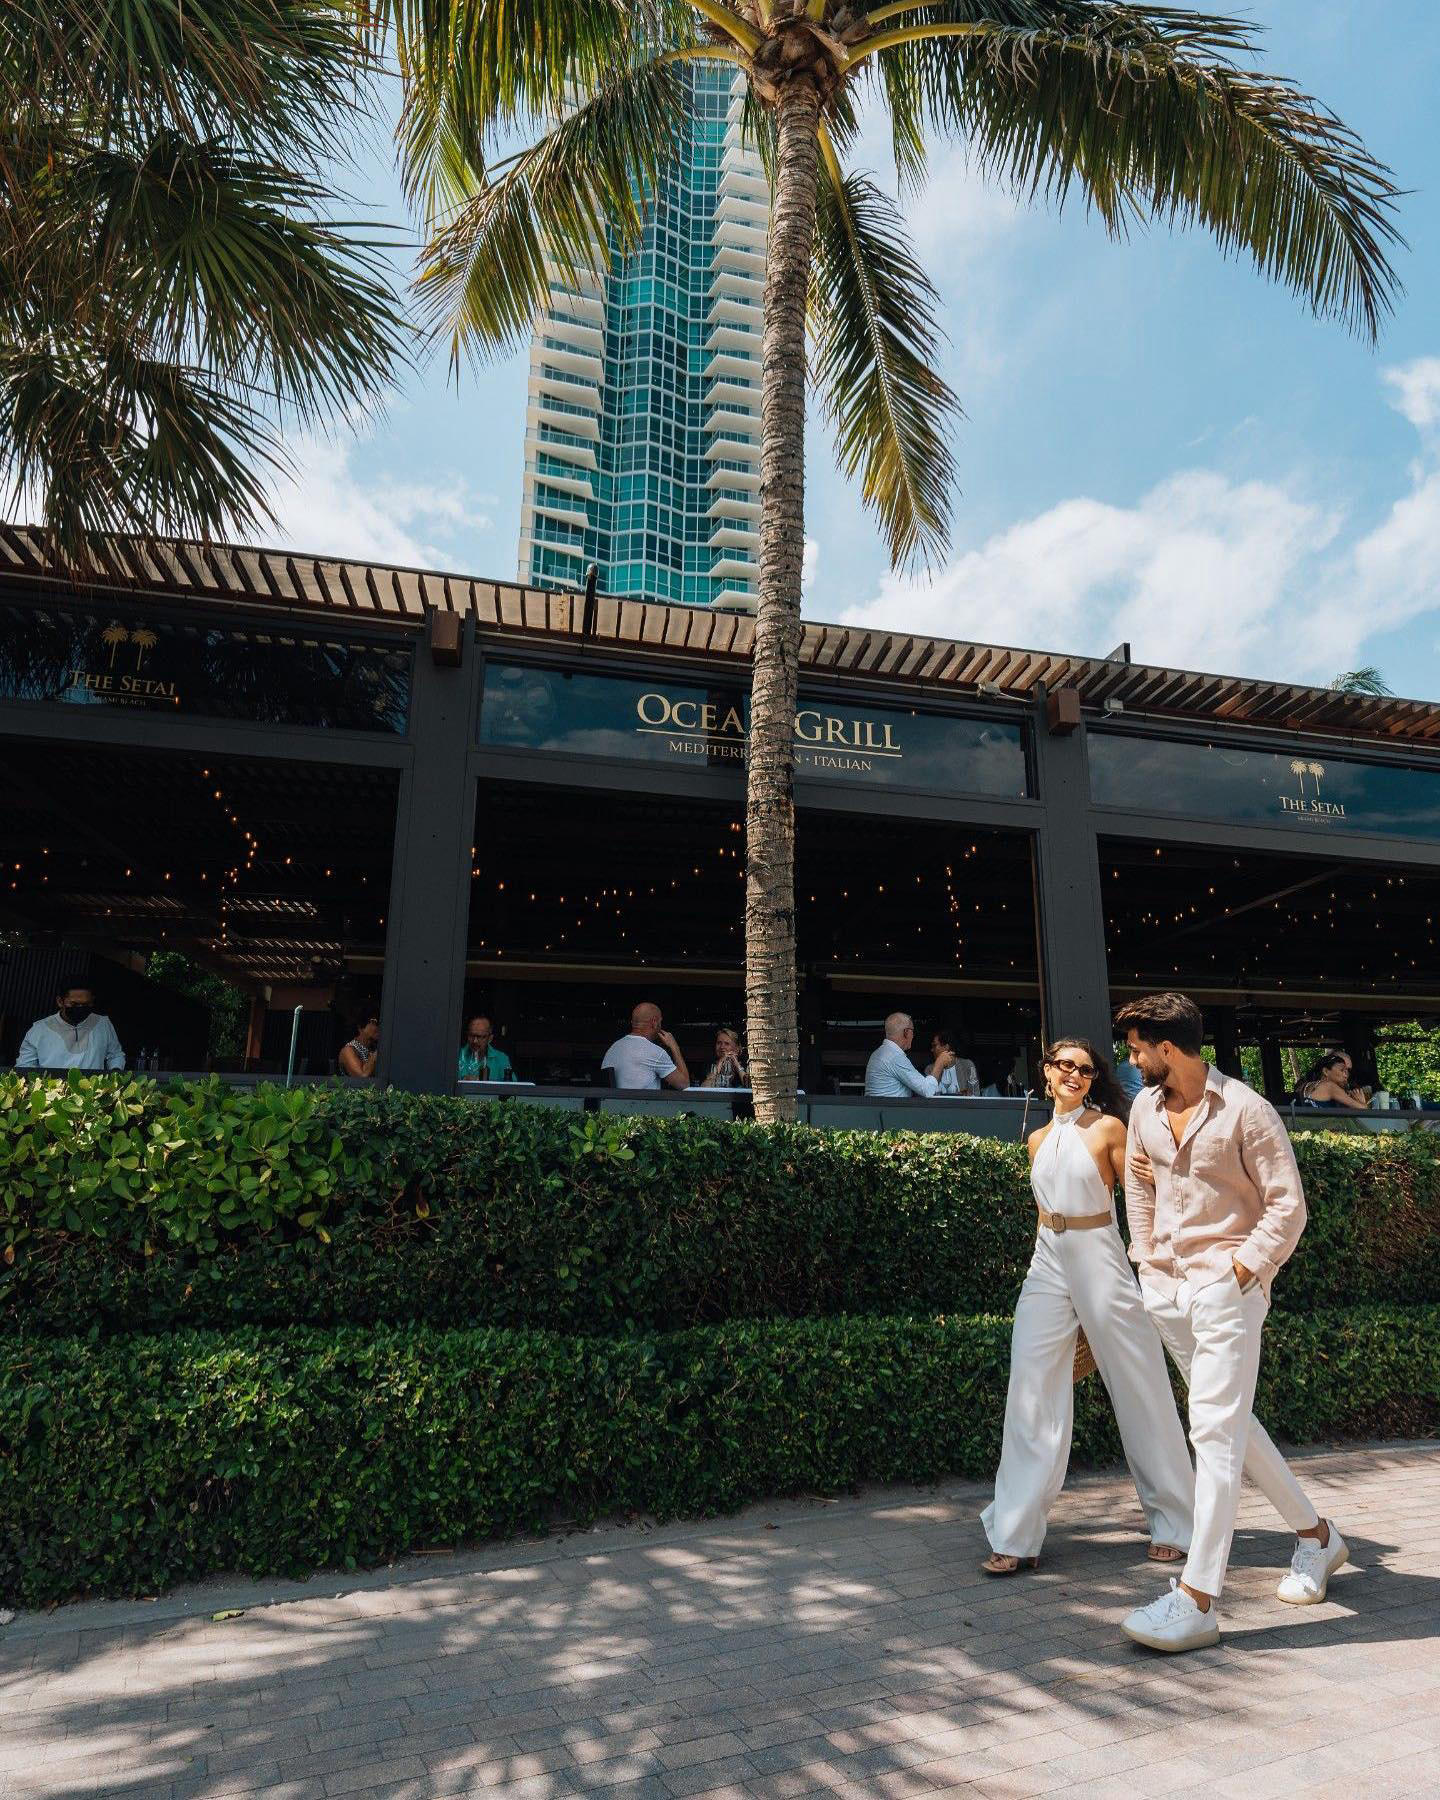 The Setai, Miami Beach - Fresh flavors and lush greenery at Ocean Grill set the scene for the perfec